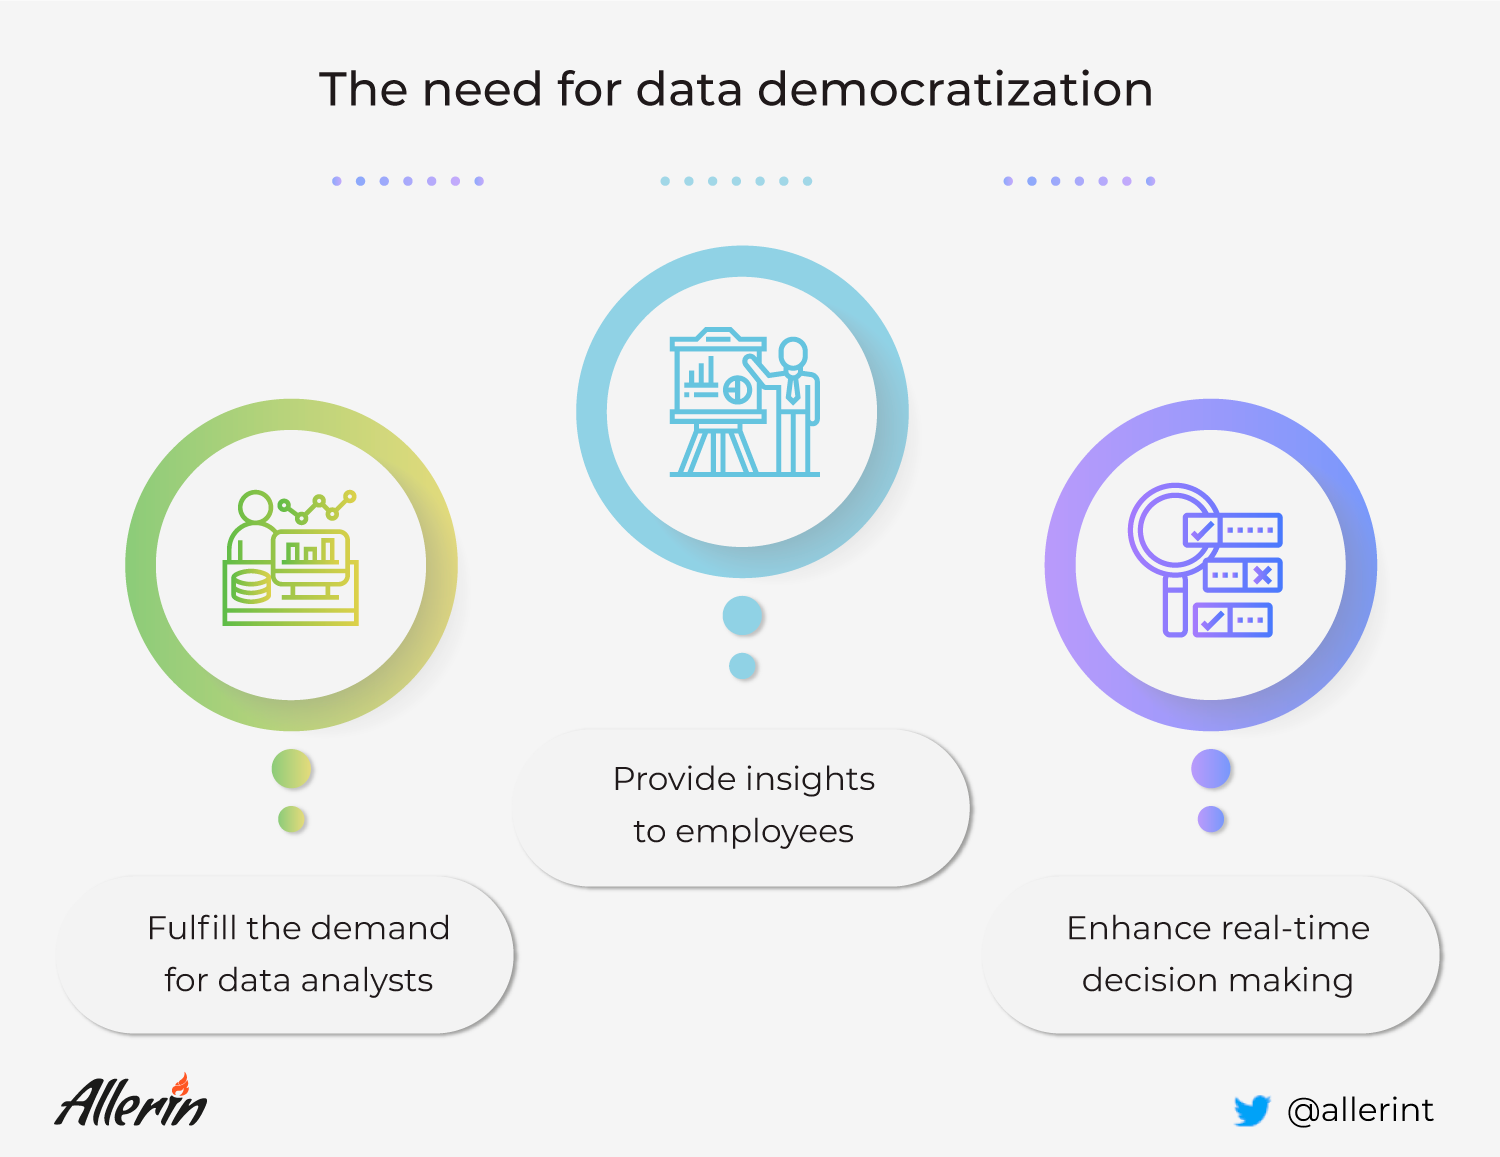 Are you ready for automation democratization?